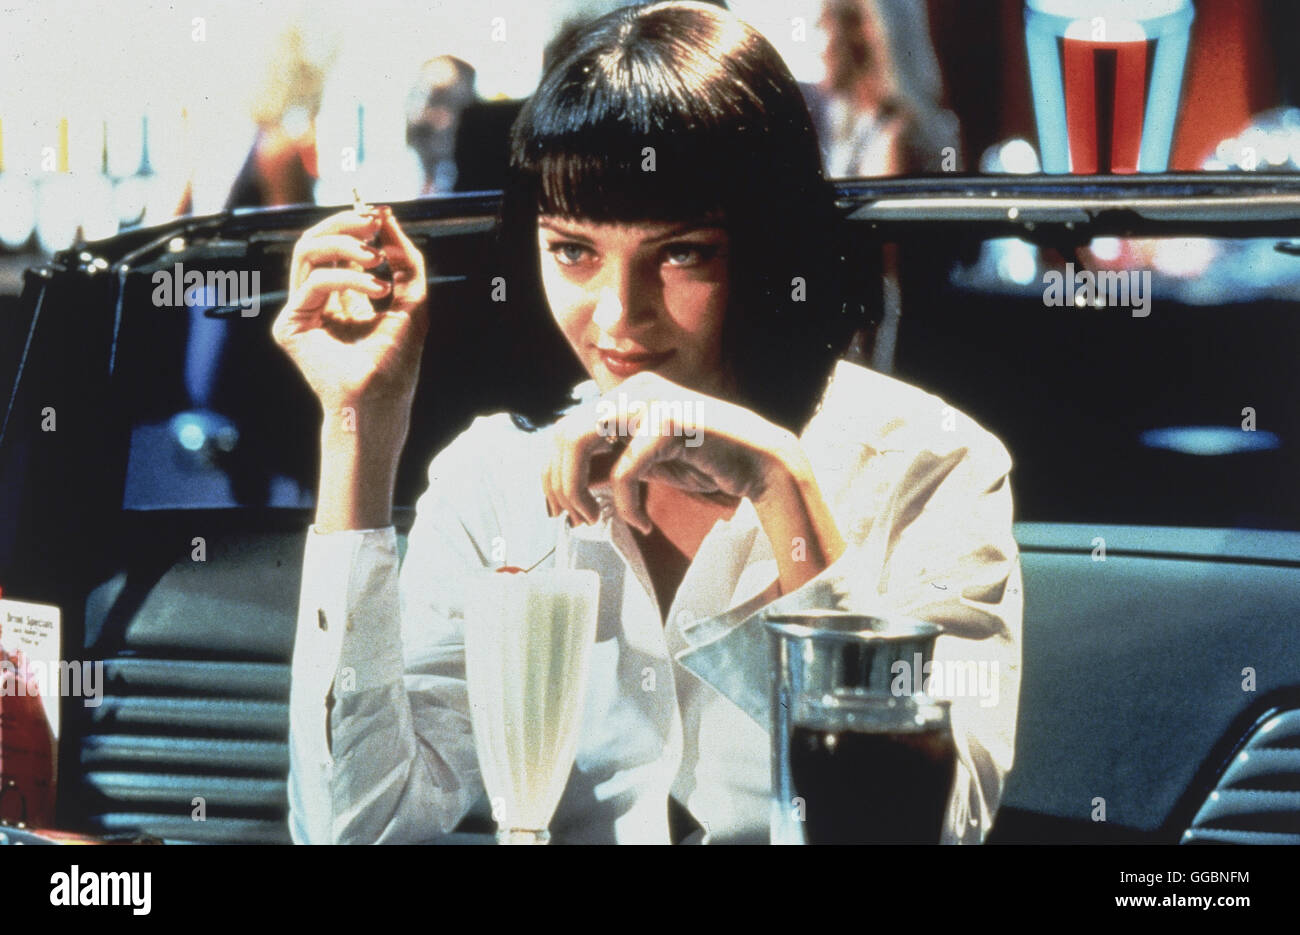 Mia Wallace High Resolution Stock Photography and Images - Alamy